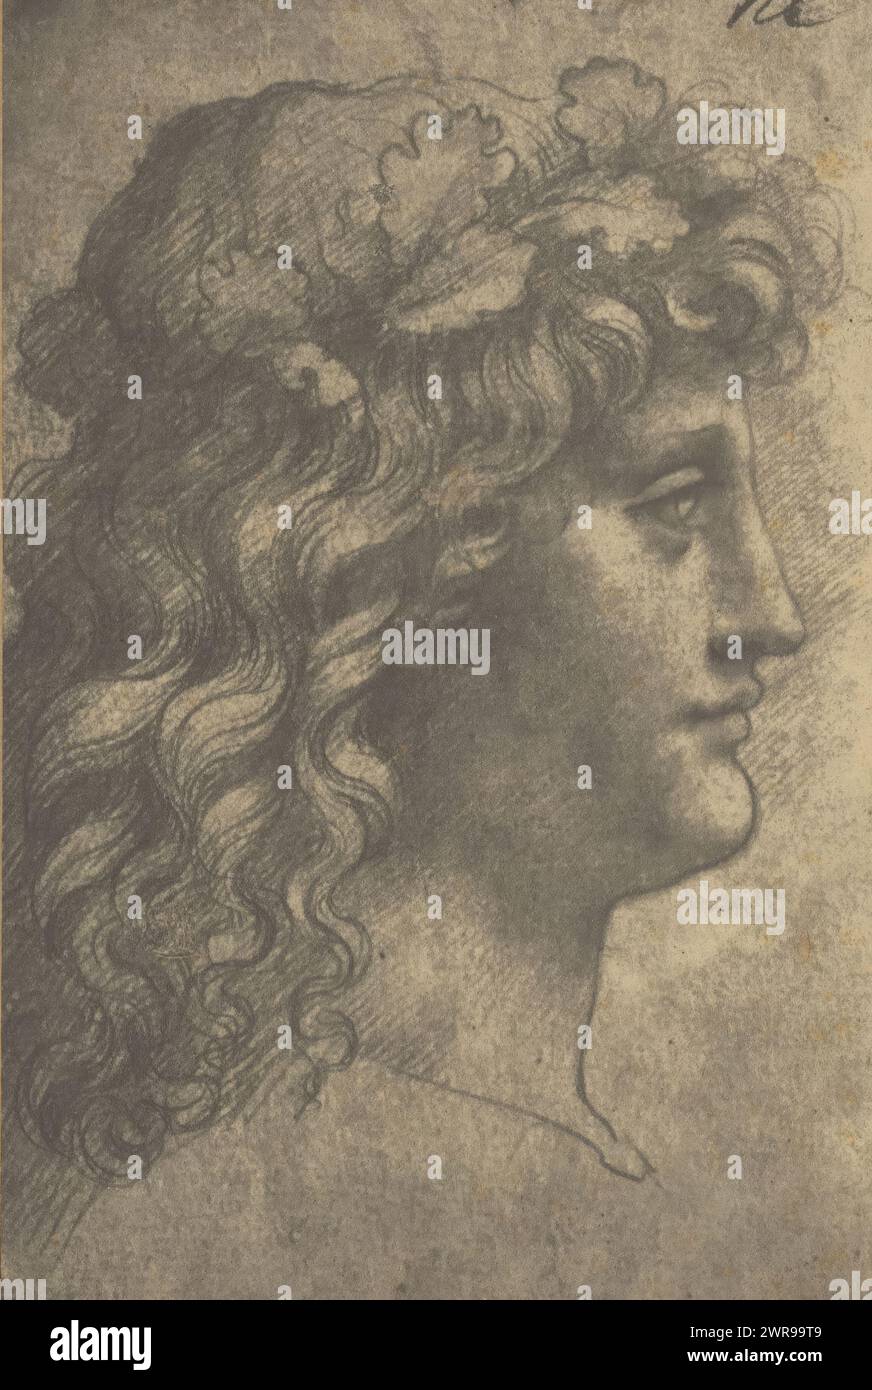 Photo reproduction of a drawing by Leonardo da Vinci (head of a man), Adolphe Braun & Cie., 1880 - 1900, paper, carbon print, height 186 mm × width 123 mm, photograph Stock Photo